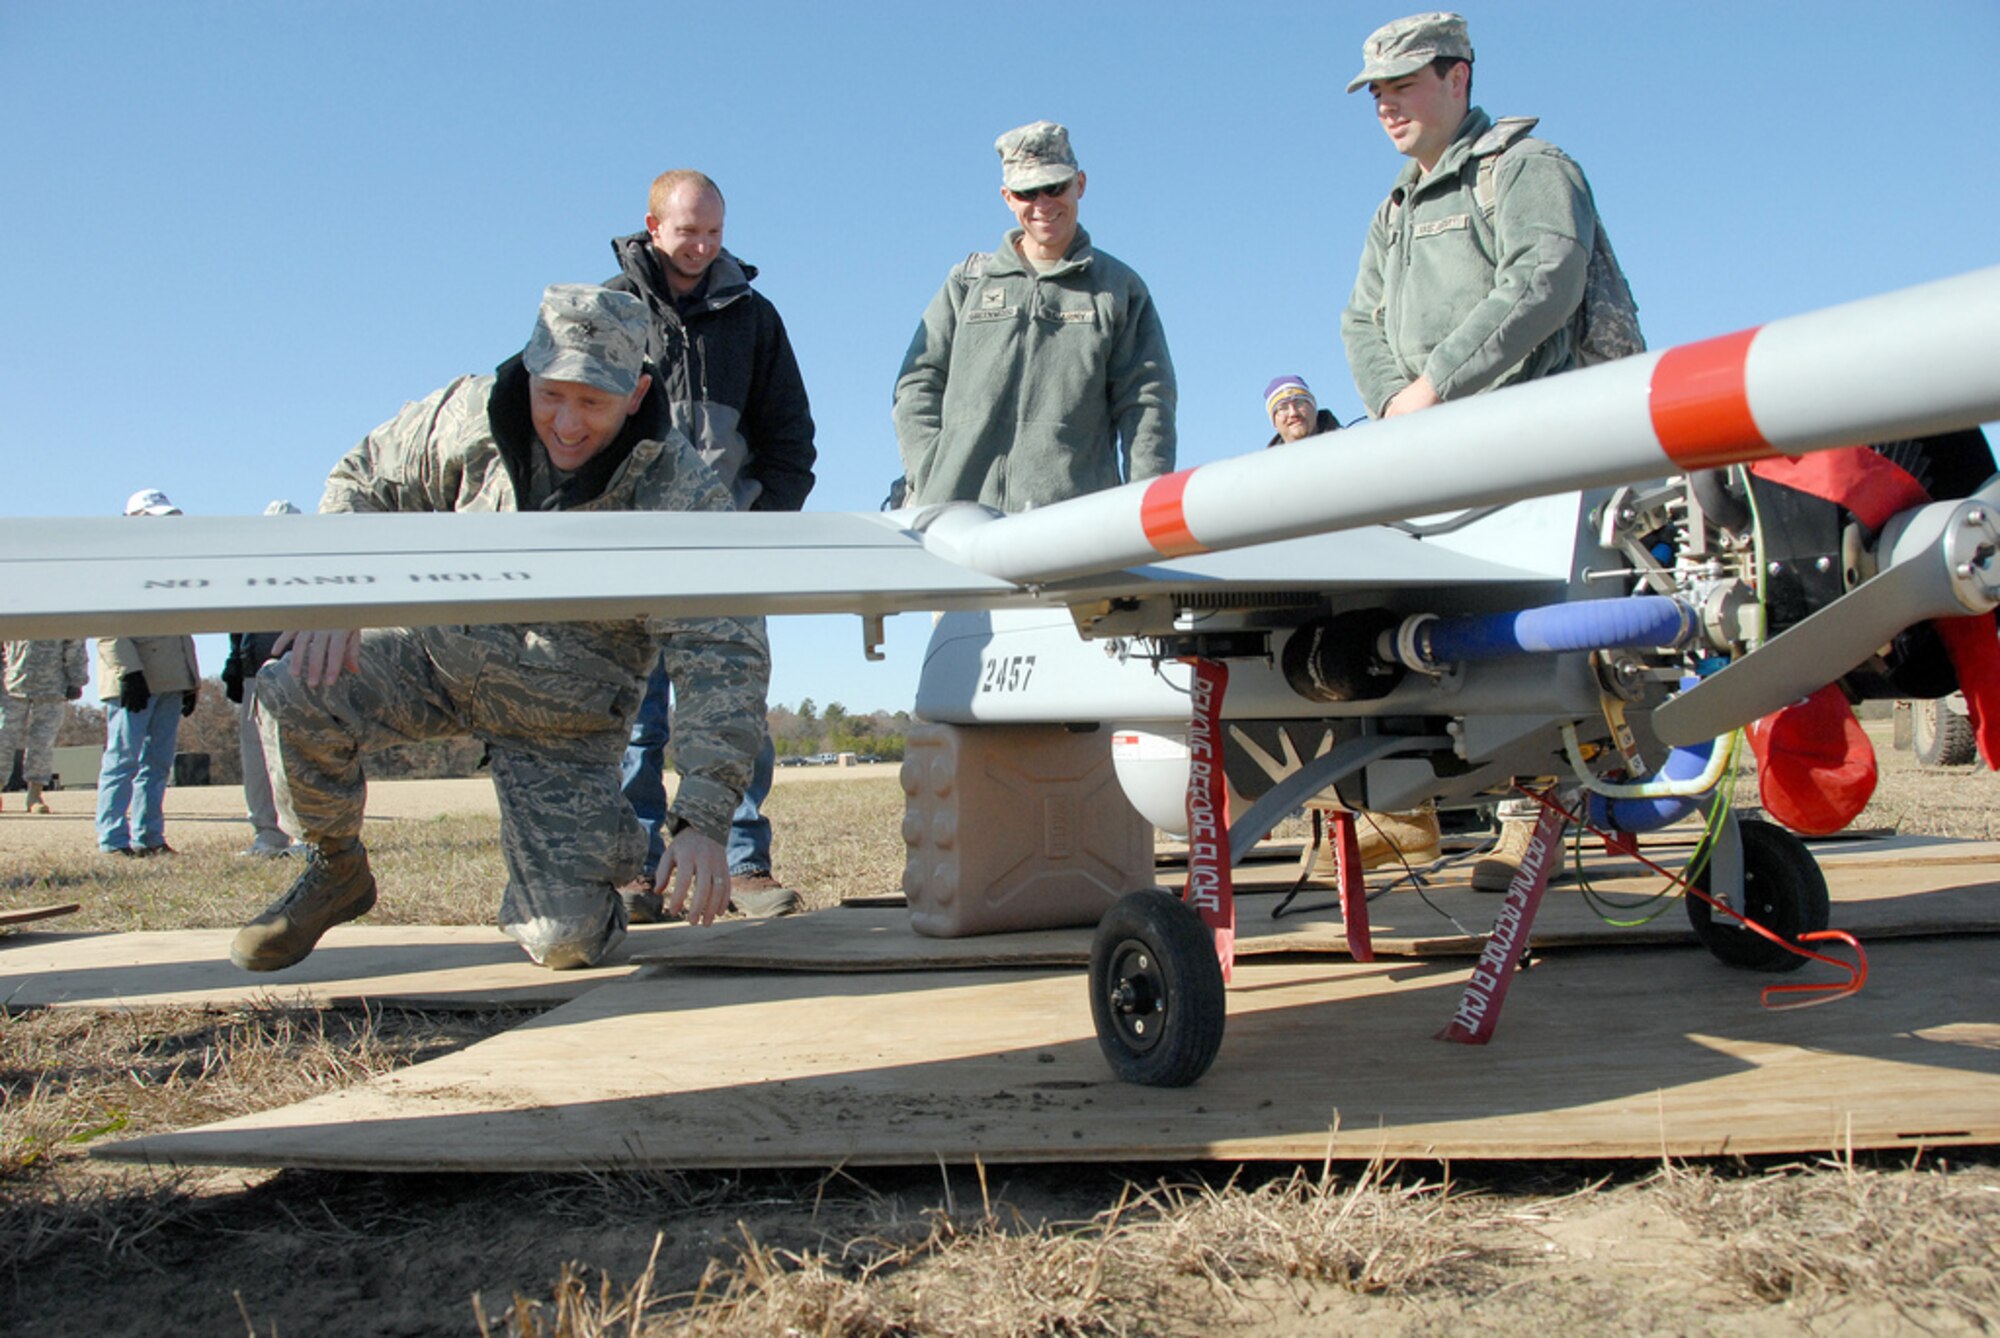 Brig. Gen. Don Dunbar, adjutant general of Wisconsin, enjoys a close inspection of the RQ-7 Shadow 200 unmanned aerial vehicle during a training exercise Nov. 2, 2009 at Fort McCoy. The 22-person UAV platoon, part of Company B, Brigade Special Troops Battalion, 32nd Infantry Brigade Combat Team, includes UAV pilots, camera operators, maintainers and support crew. The platoon will operate out of Volk Field, where a new $8 million facility is planned. Wisconsin National Guard photo by 1st Sgt. Vaughn R. Larson
